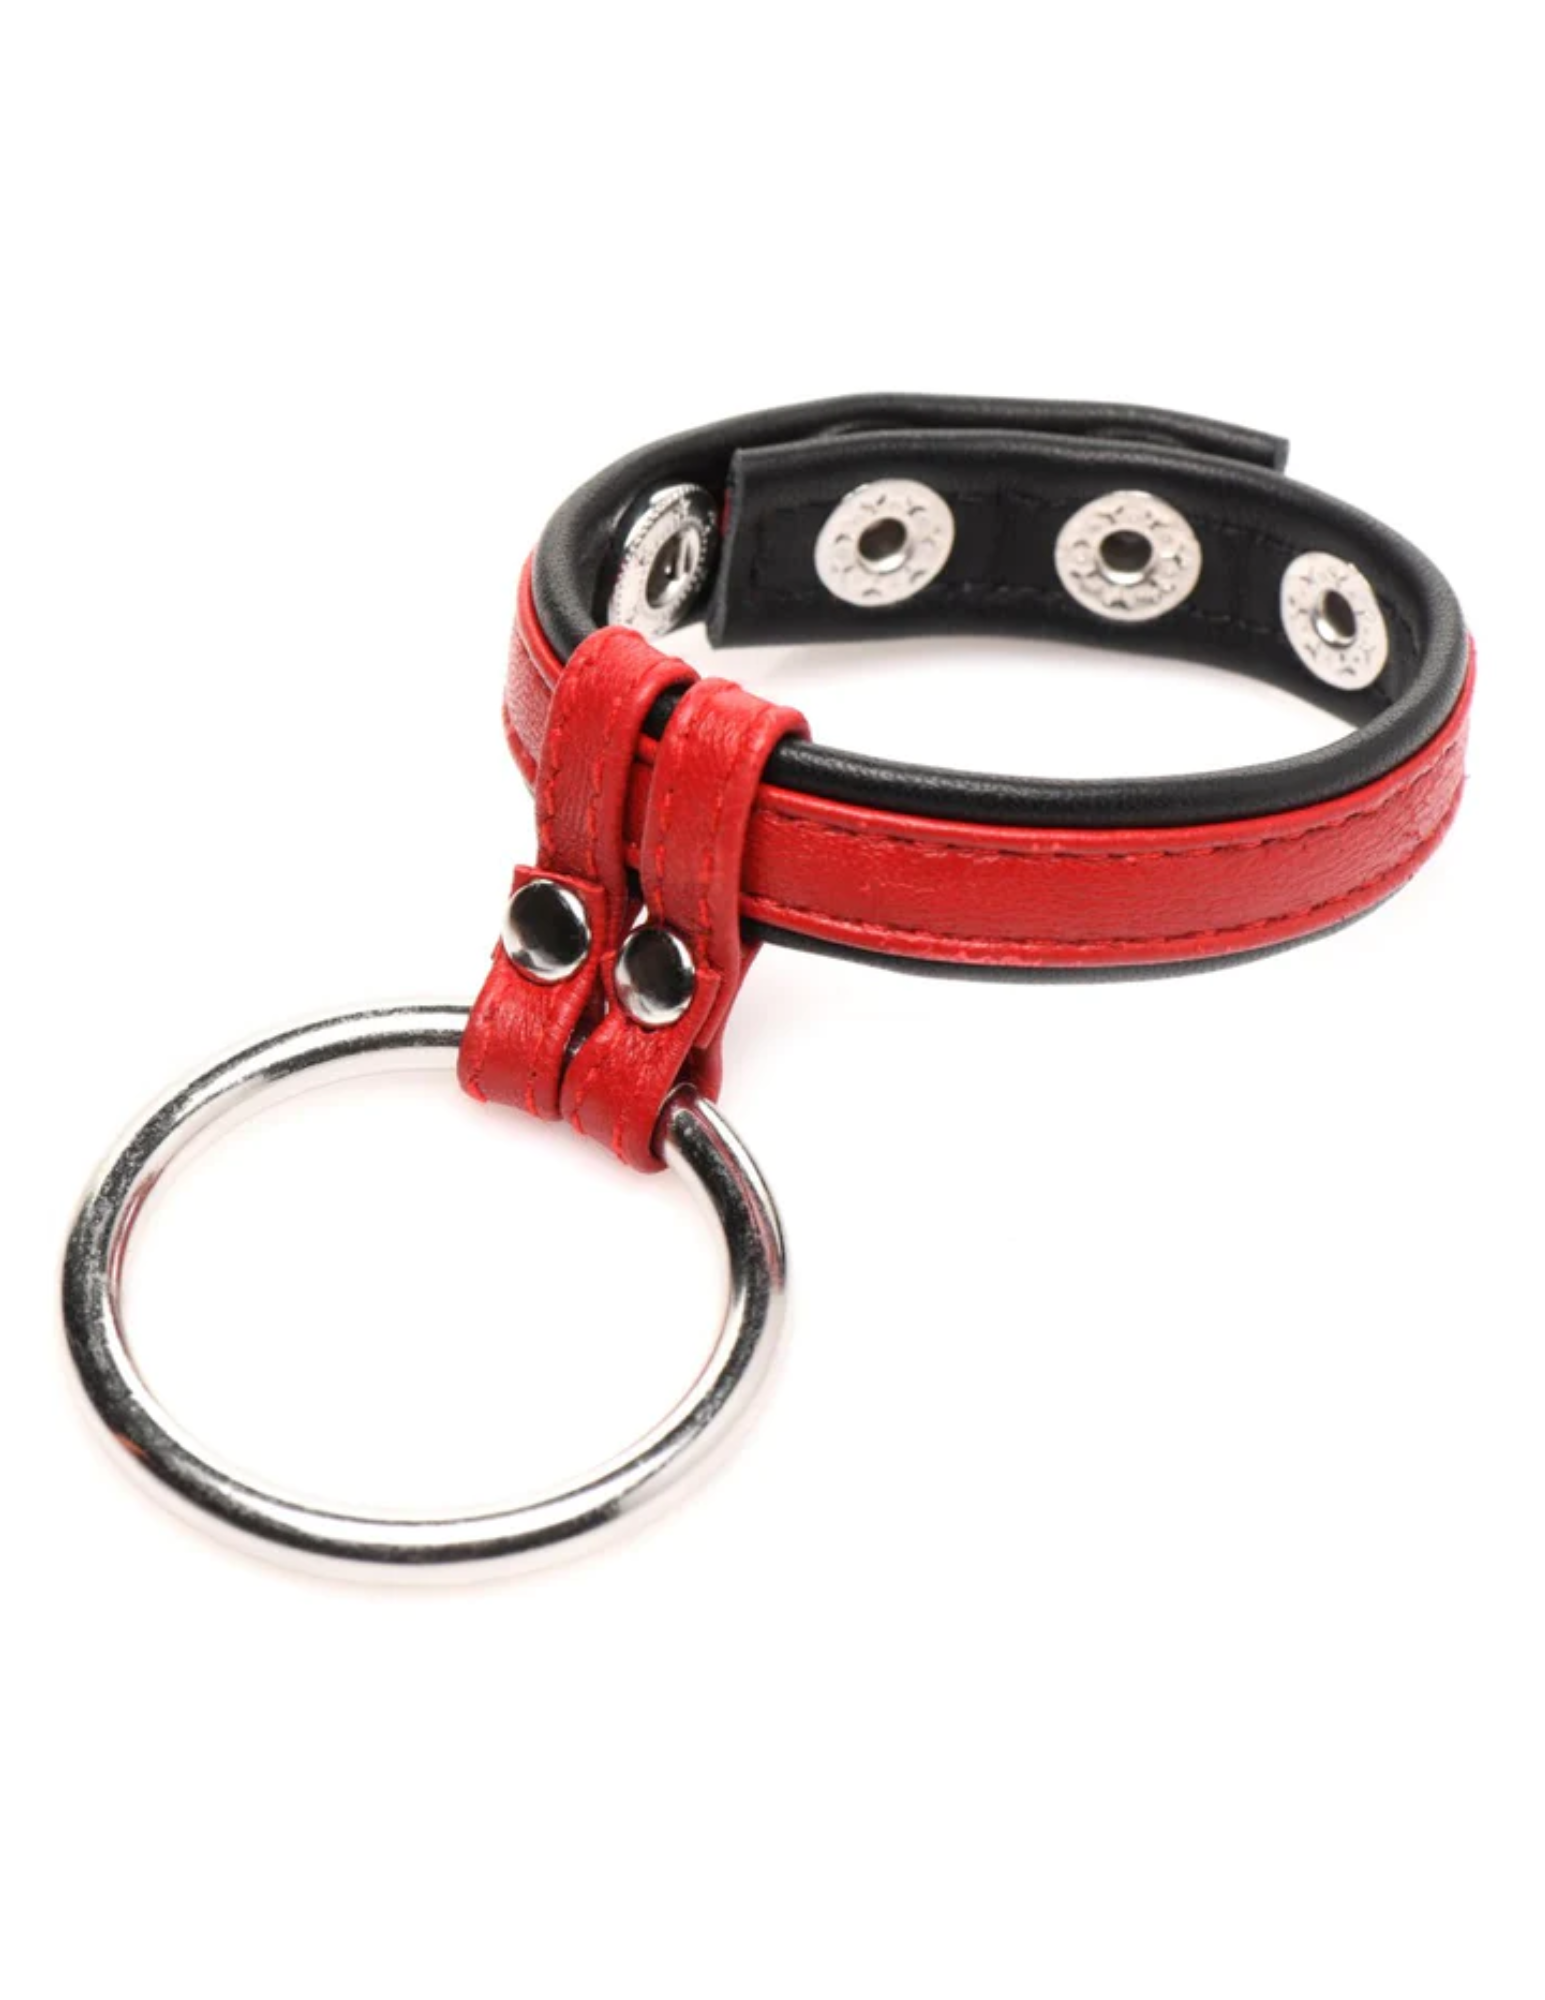 Full view of the Strict Cock Gear Leather and Steel Cock and Ball Ring by XR Brands shows off its sturdy design.